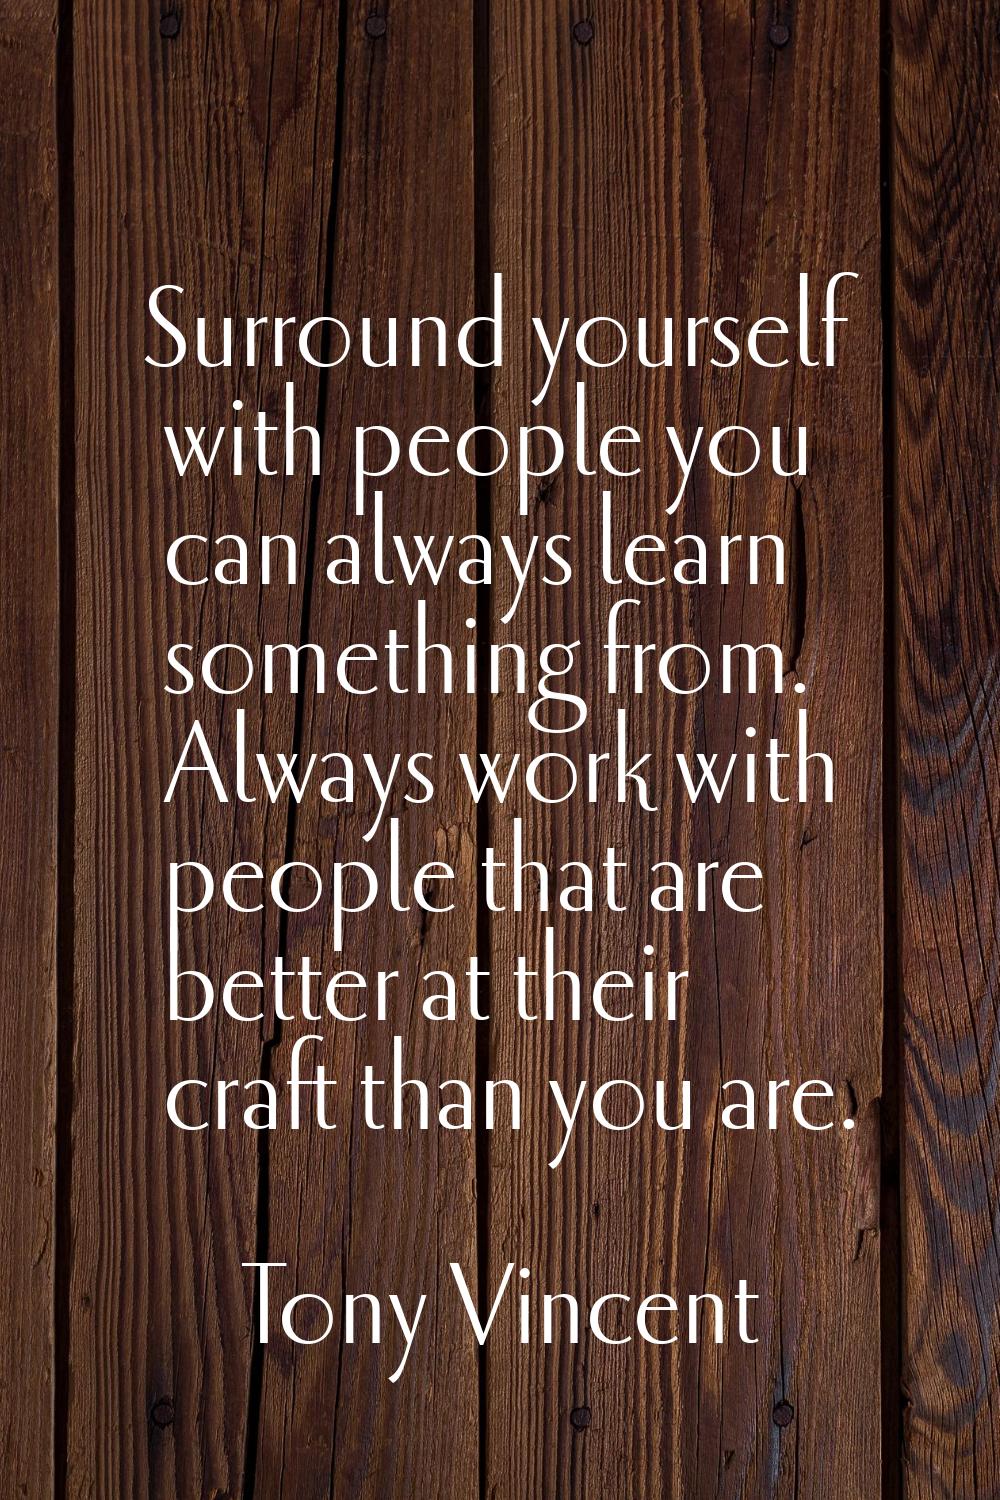 Surround yourself with people you can always learn something from. Always work with people that are